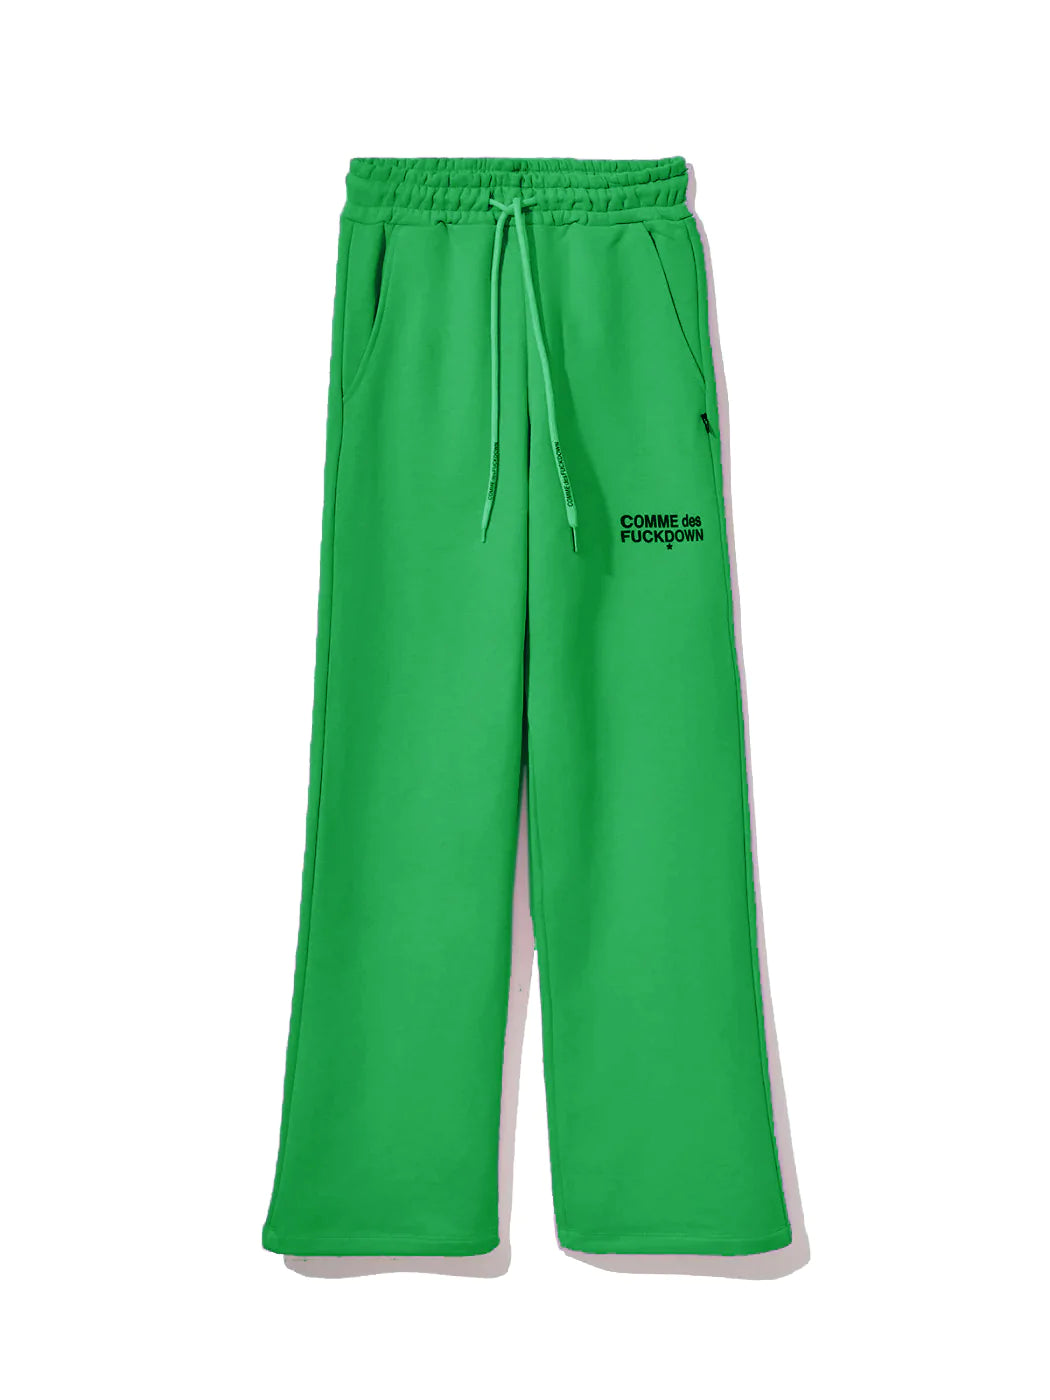 Comme Des Fuckdown Green Cotton Jeans & Pant Comme Des Fuckdown, feed-1, Green, Jeans & Pants - Women - Clothing, S at SEYMAYKA